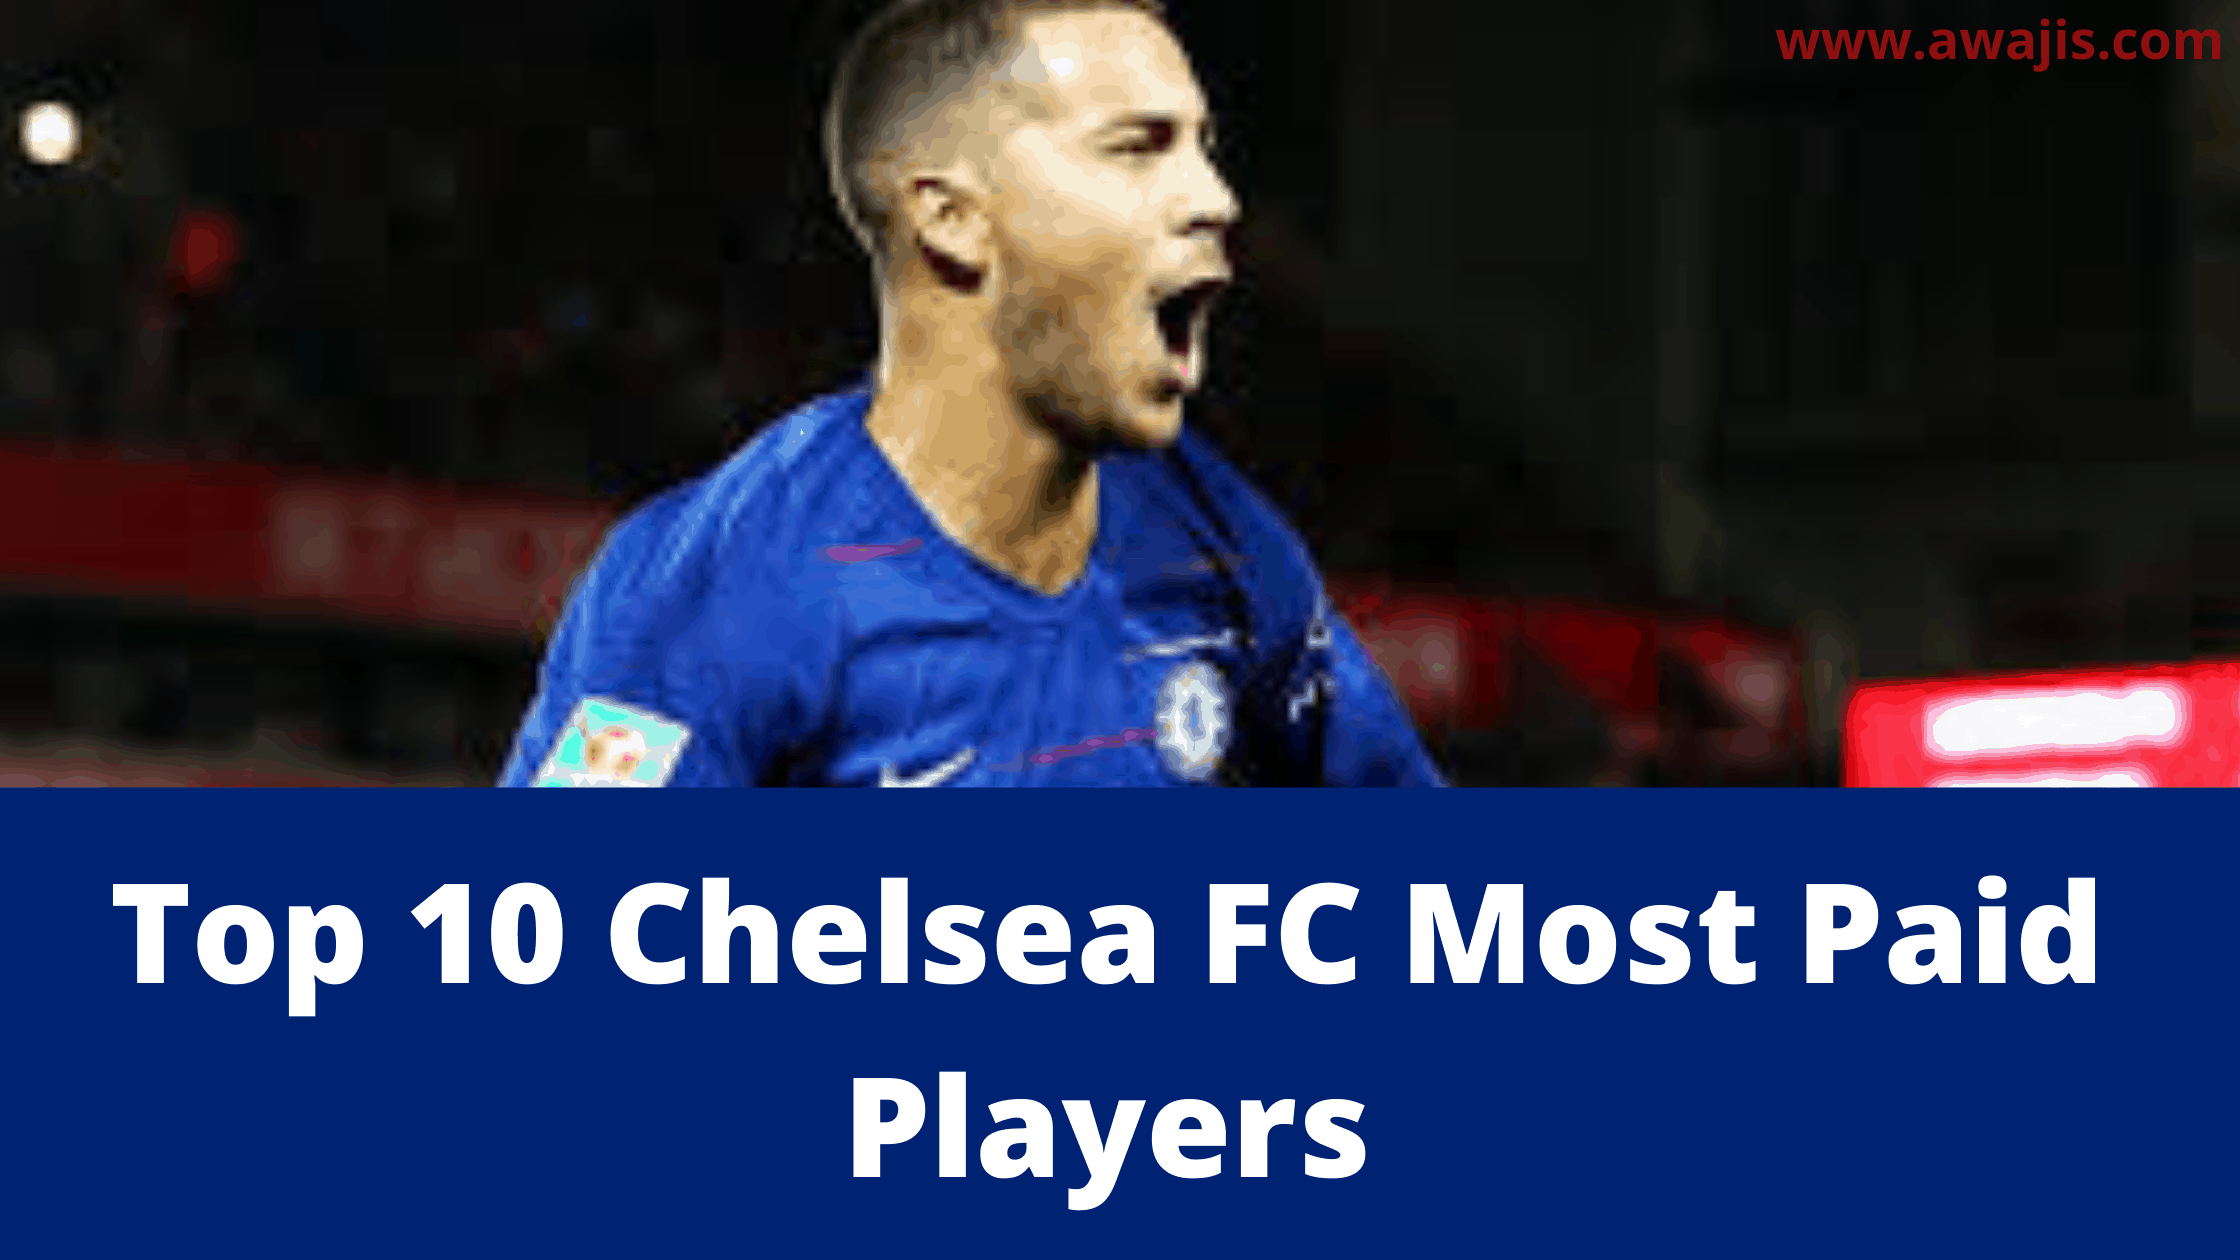 Top 10 Chelsea FC Most Paid Players | Current Information